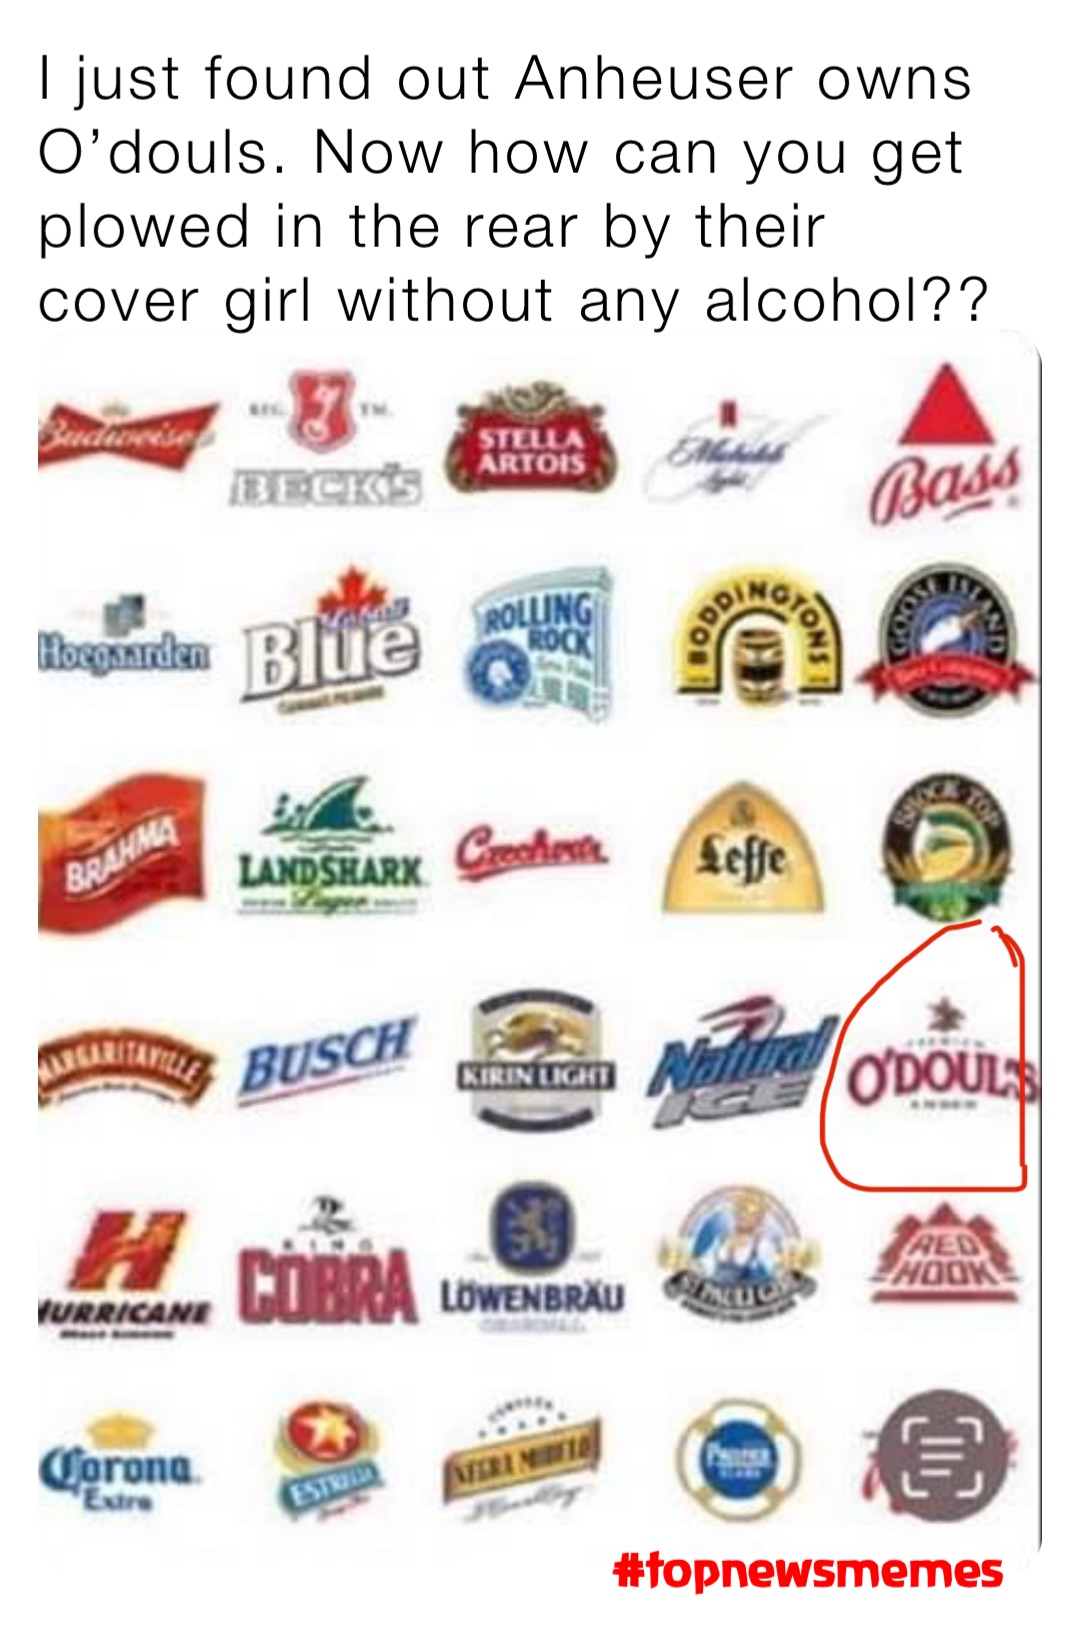 I just found out Anheuser owns O’douls. Now how can you get plowed in the rear by their cover girl without any alcohol??